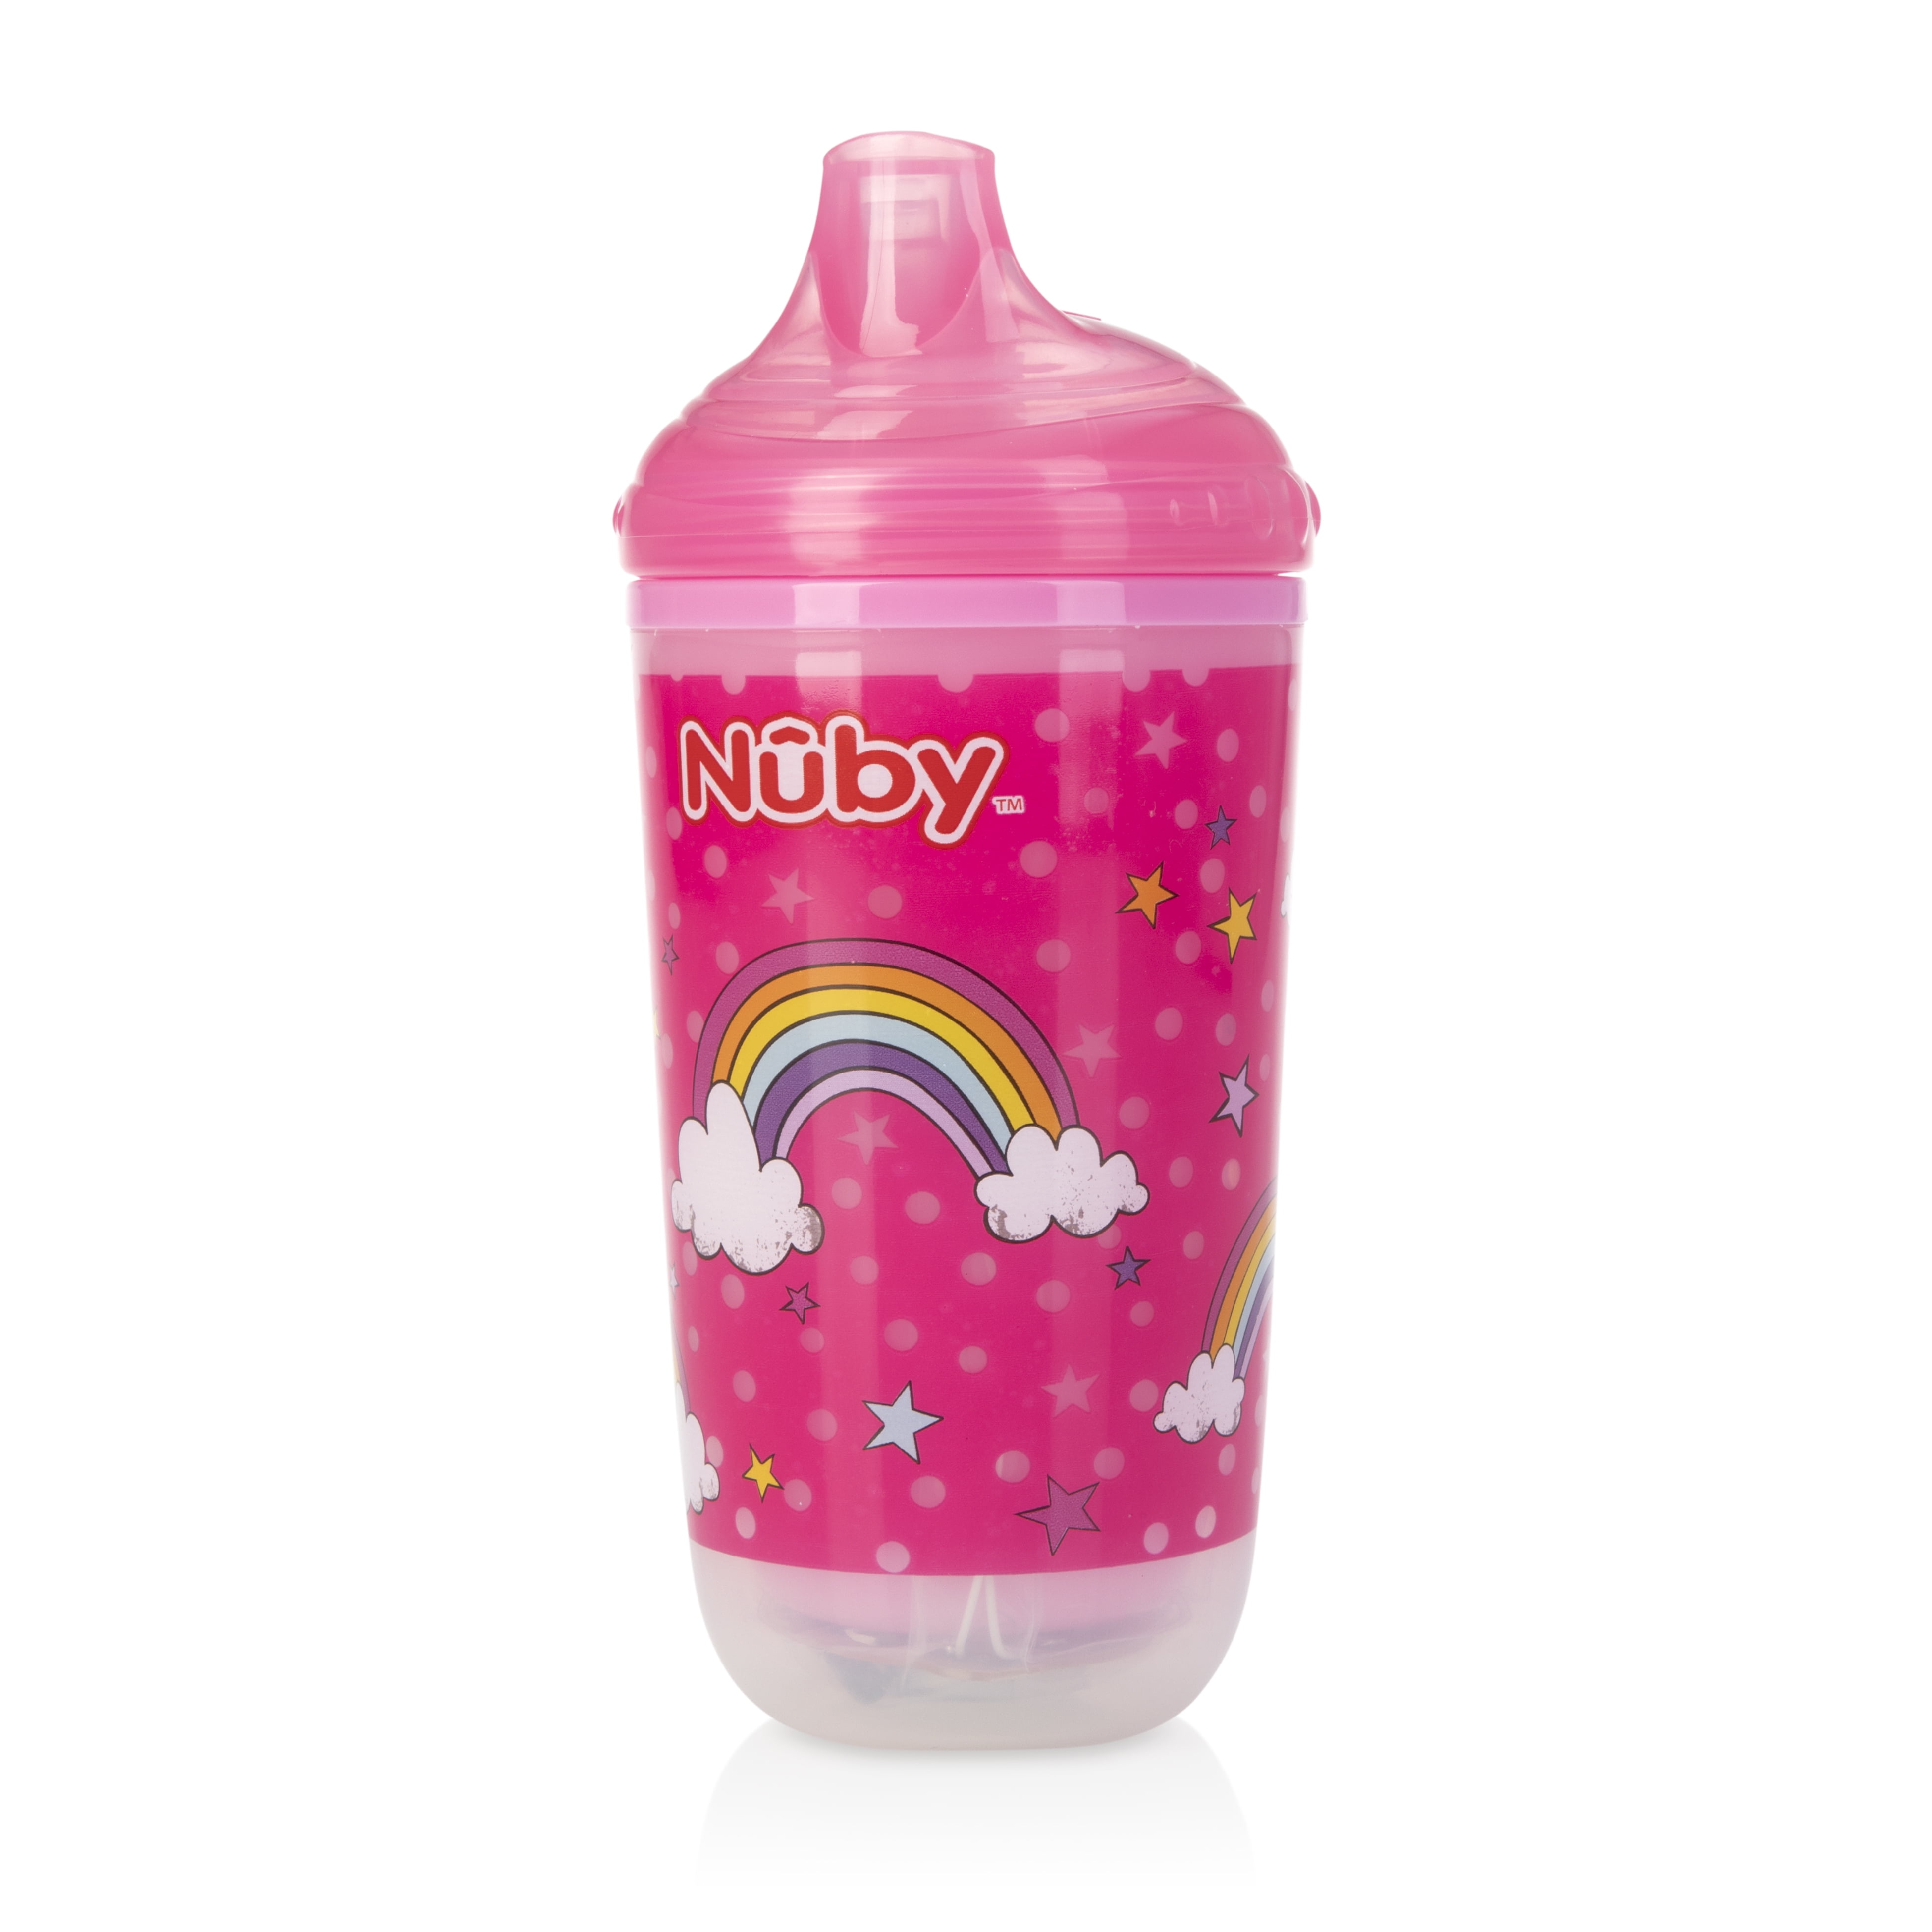 NUBY Decorated Incredible Gulp 360ml Sippy Cup Assortment